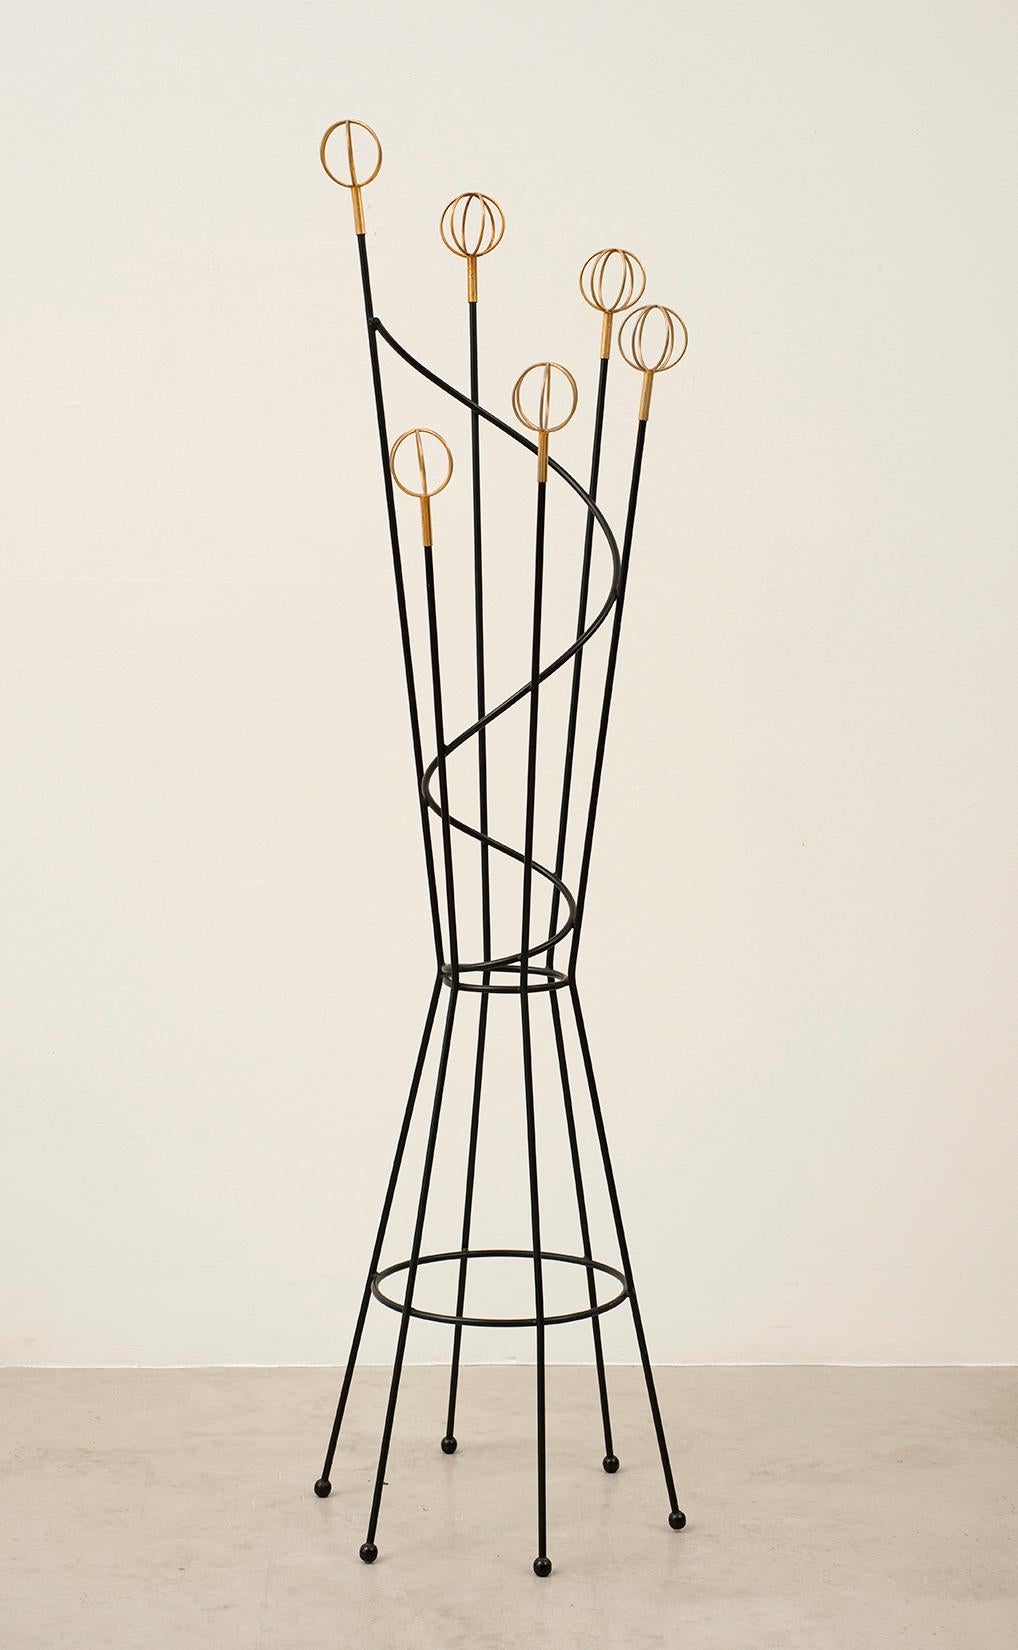 French modernist coat rack by Roger Feraud for Geo. In black lacquered metal with brass spherical finials. France, 1950s.